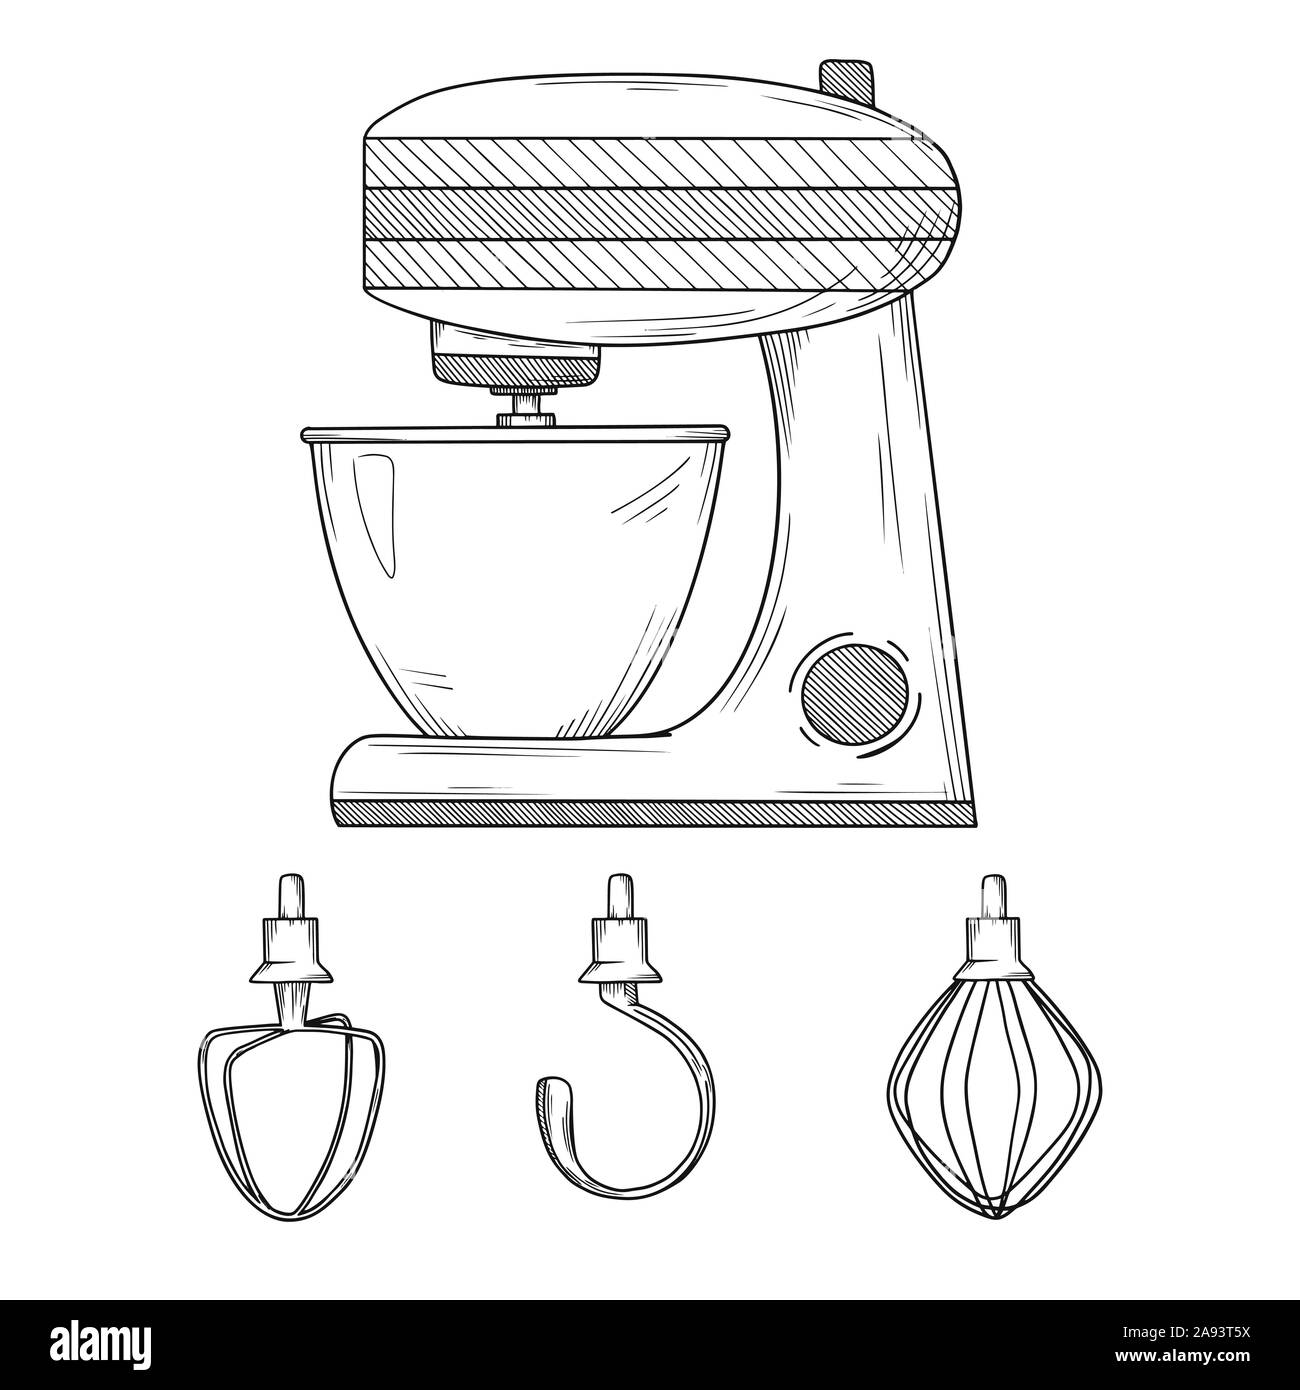 Food processor with different nozzles isolated on white background. Vector illustrations in sketch style Stock Vector